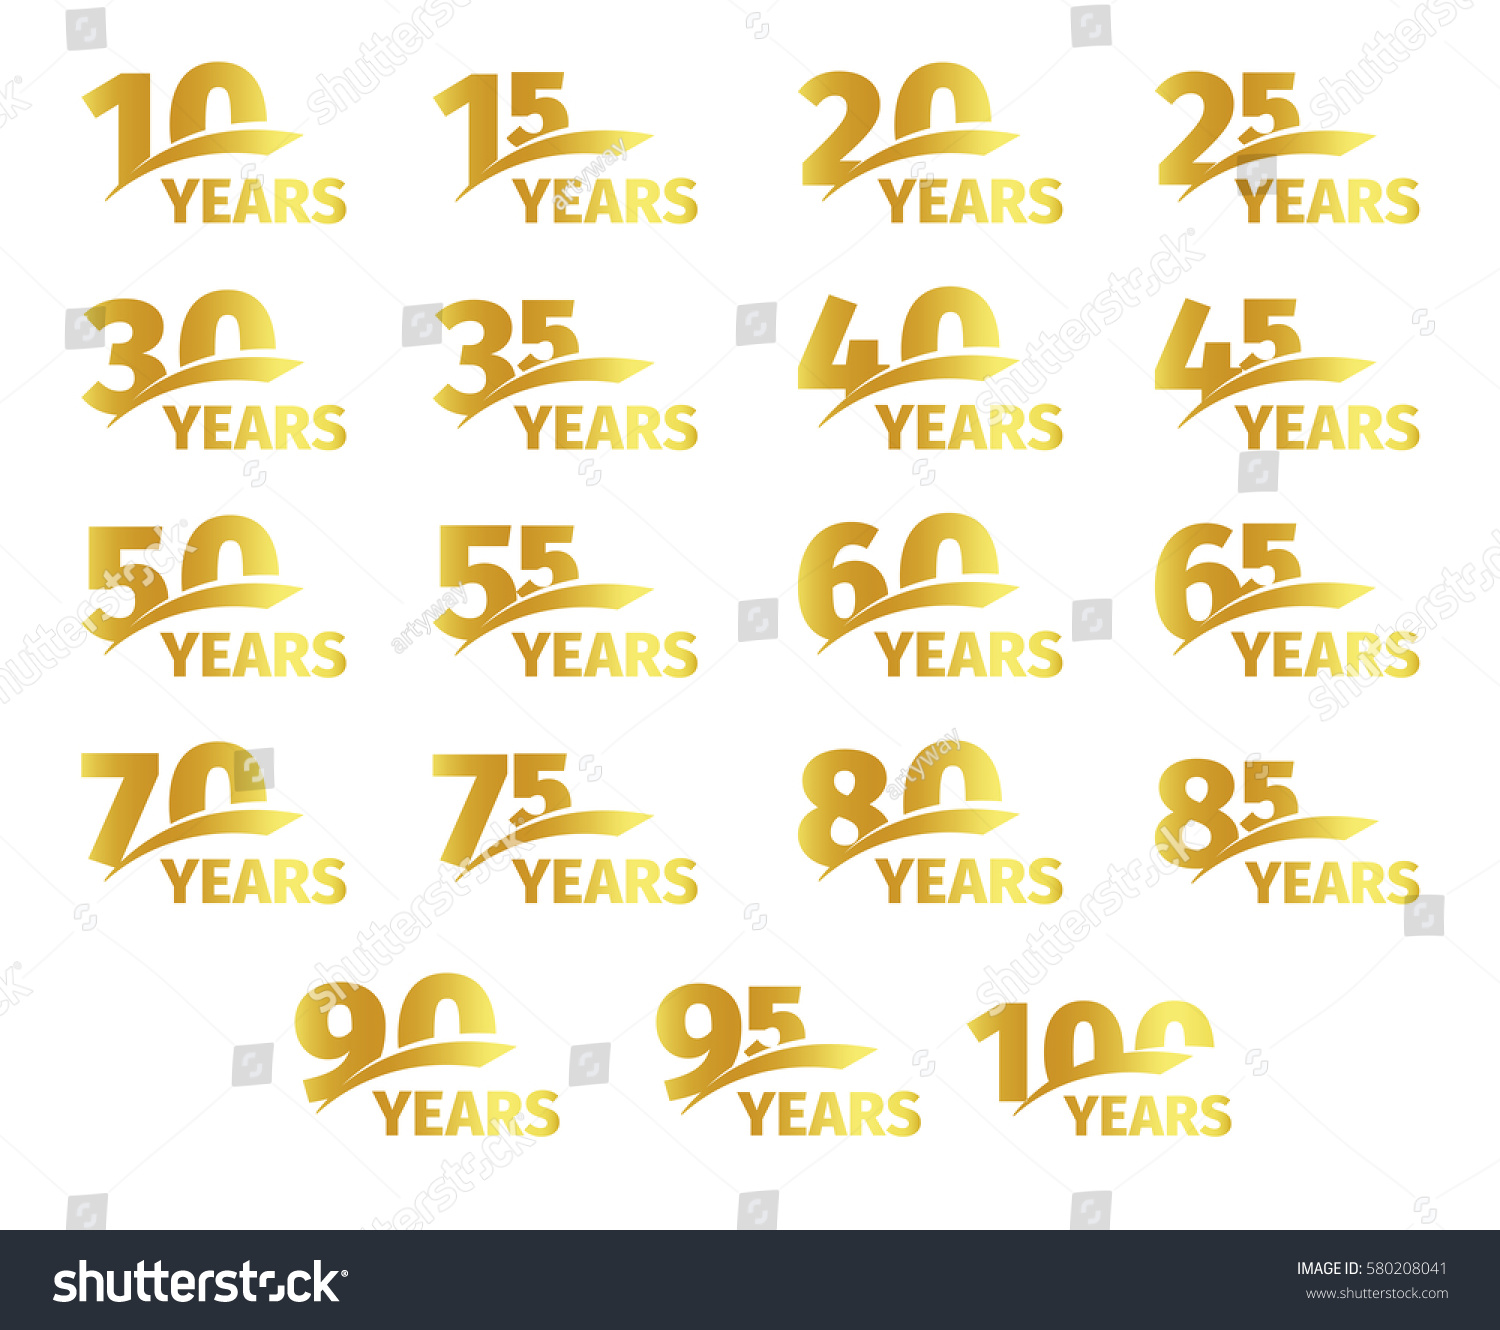 SVG of Isolated golden color numbers with word years icons collection on white background, birthday anniversary greeting card elements set vector illustration svg